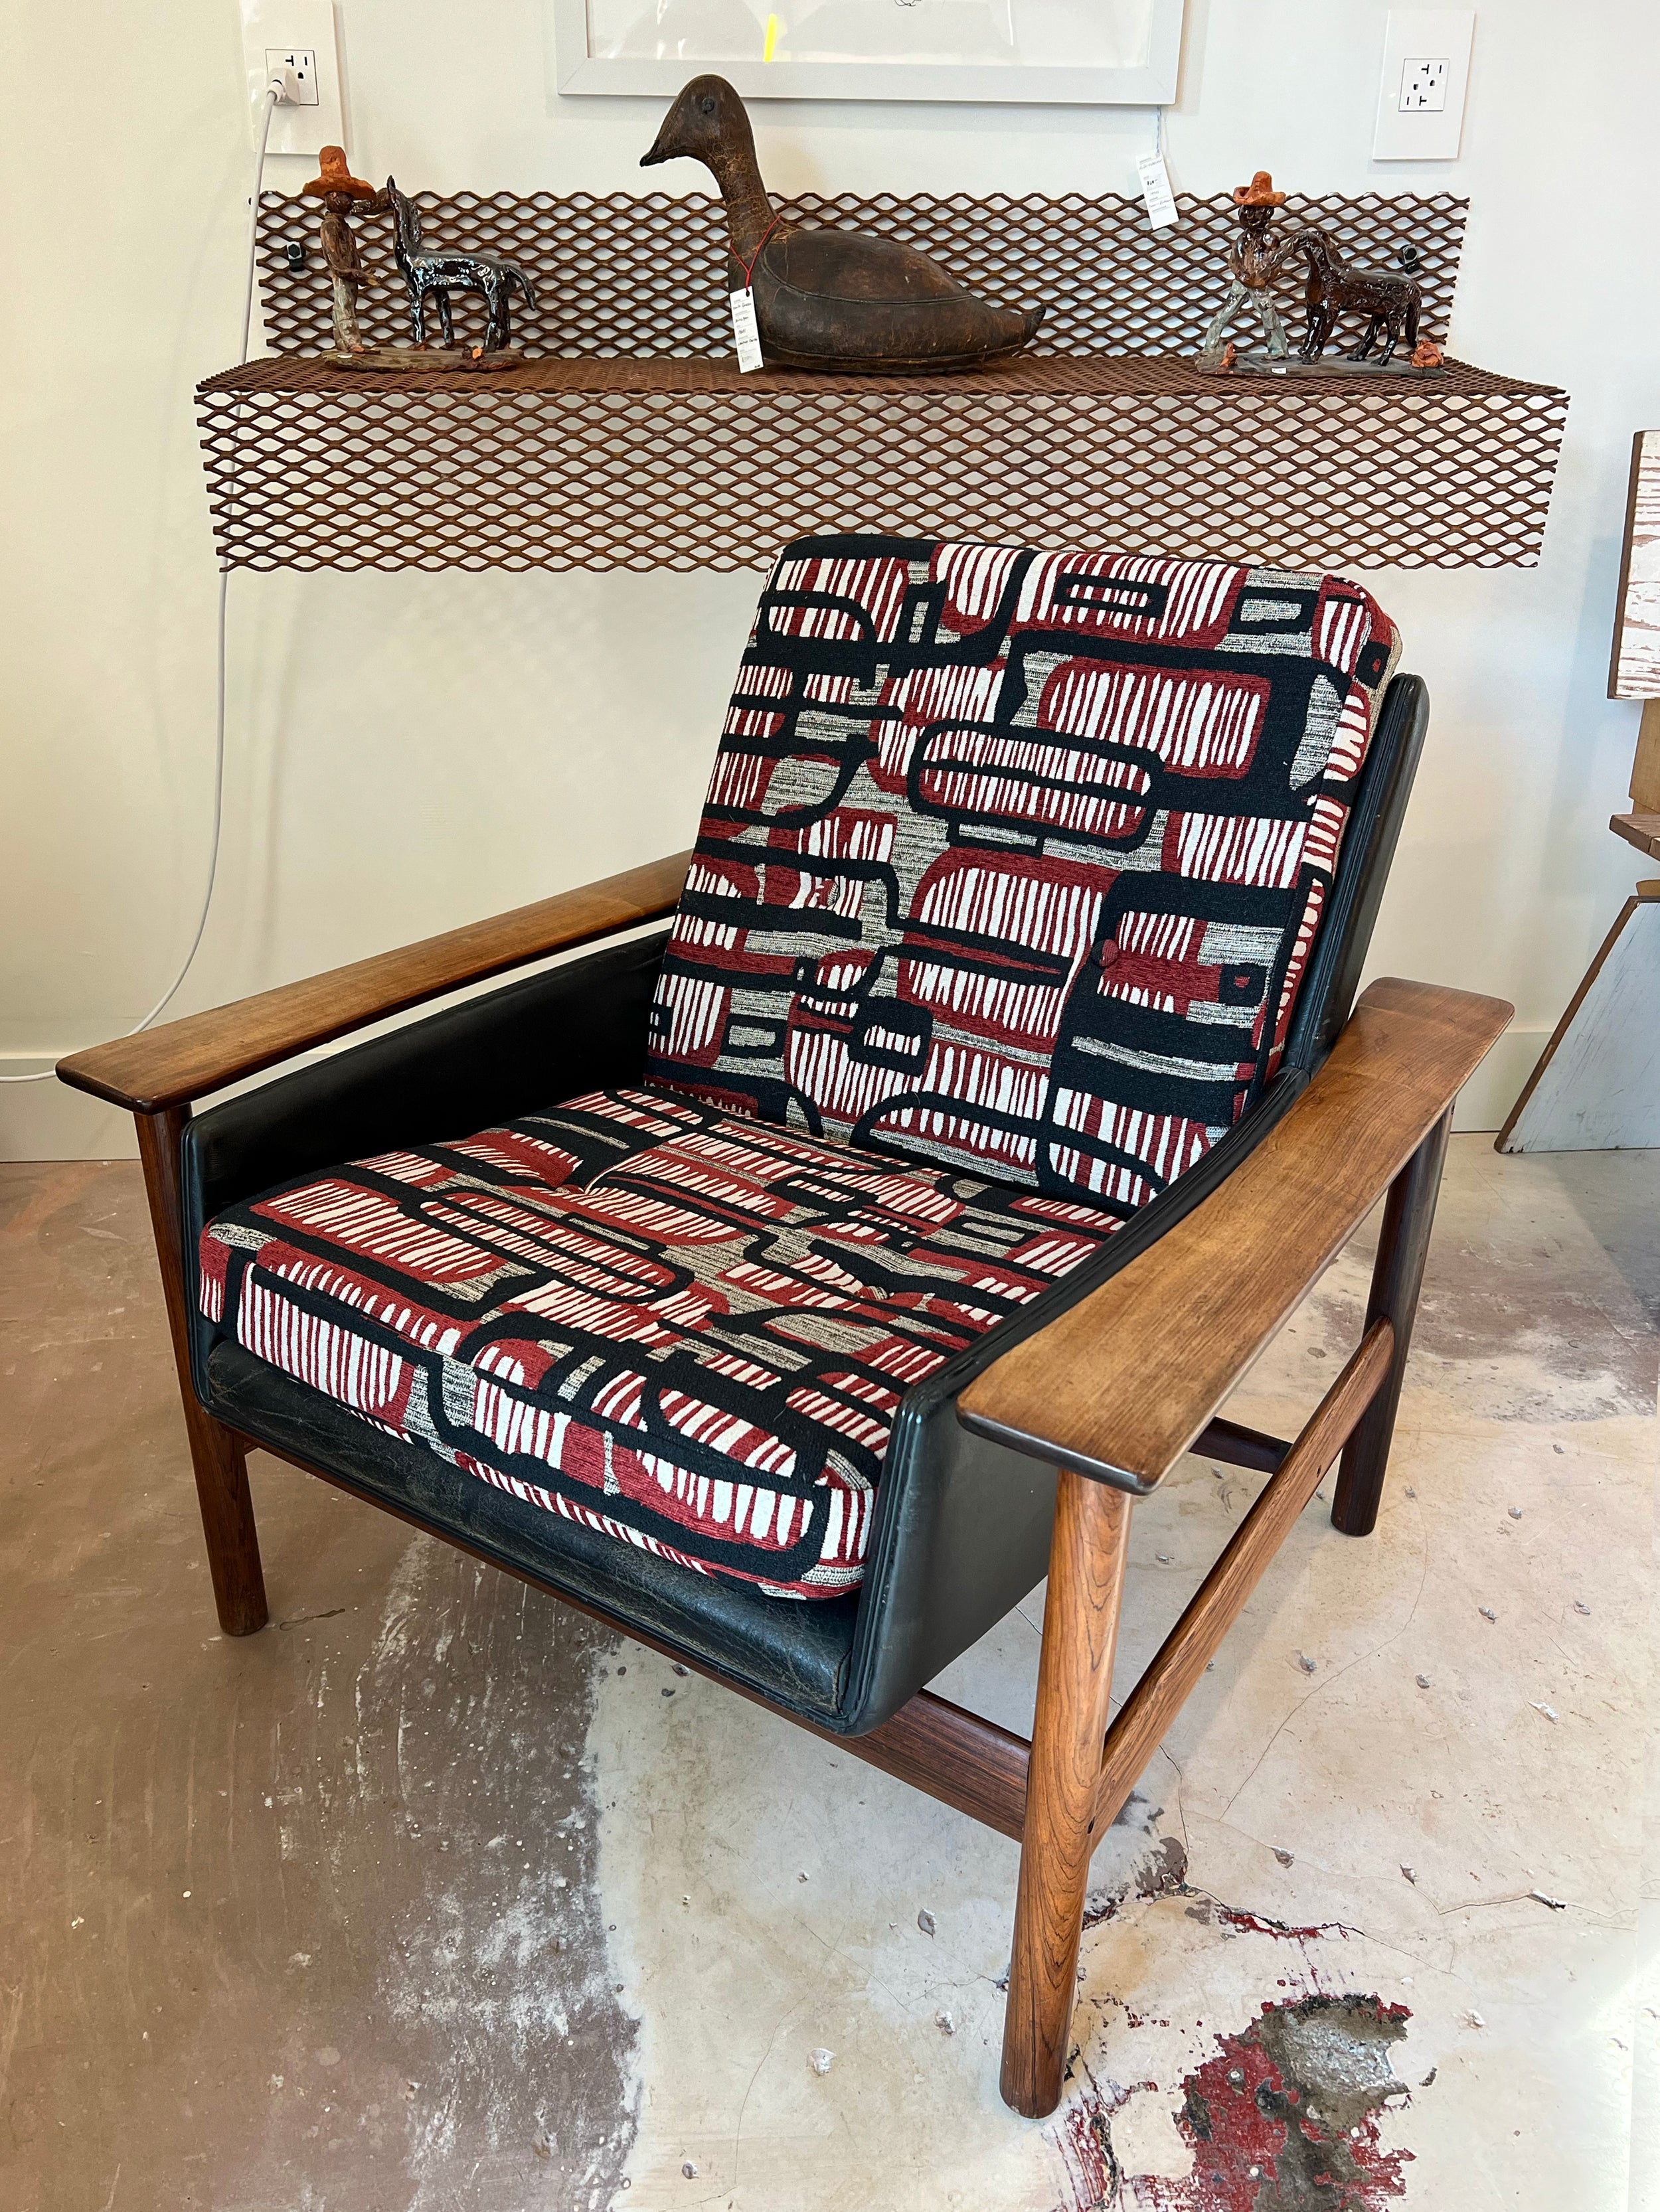 Vintage rosewood lounge chair by Sven Ivar Dysthe for Dokka Mobler. The frame is in great condition, nice color on the rosewood and solid construction. The leather is original to the chair and has wear consistent with age (see photos). The cushions